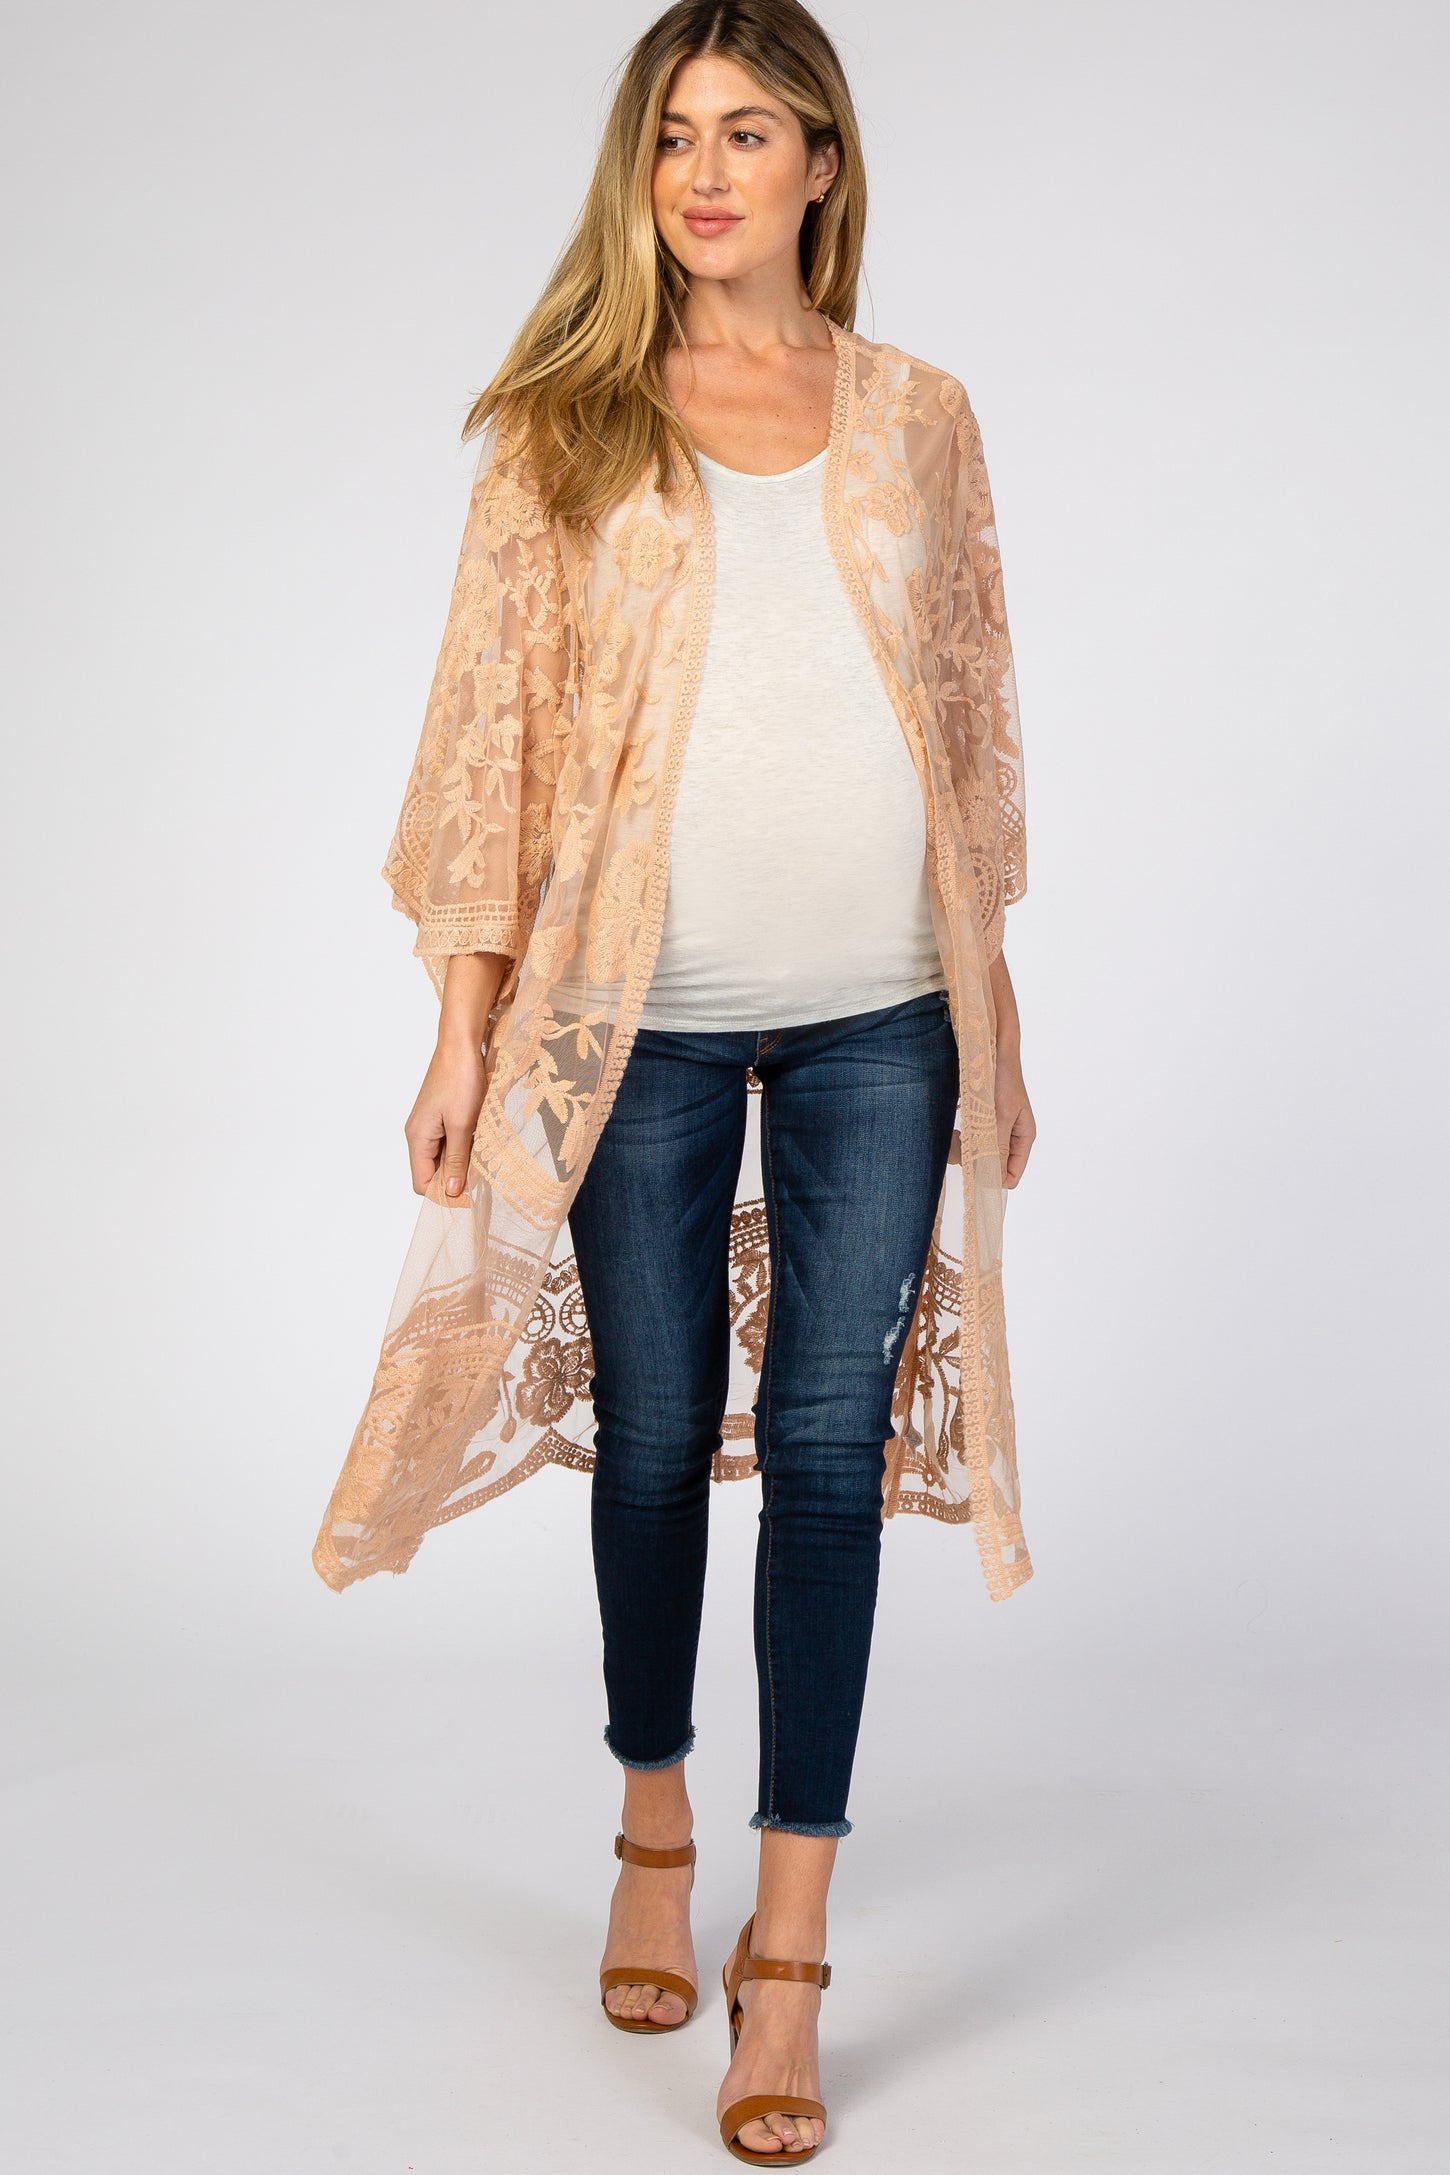 Taupe Mesh Lace Maternity Cover Up